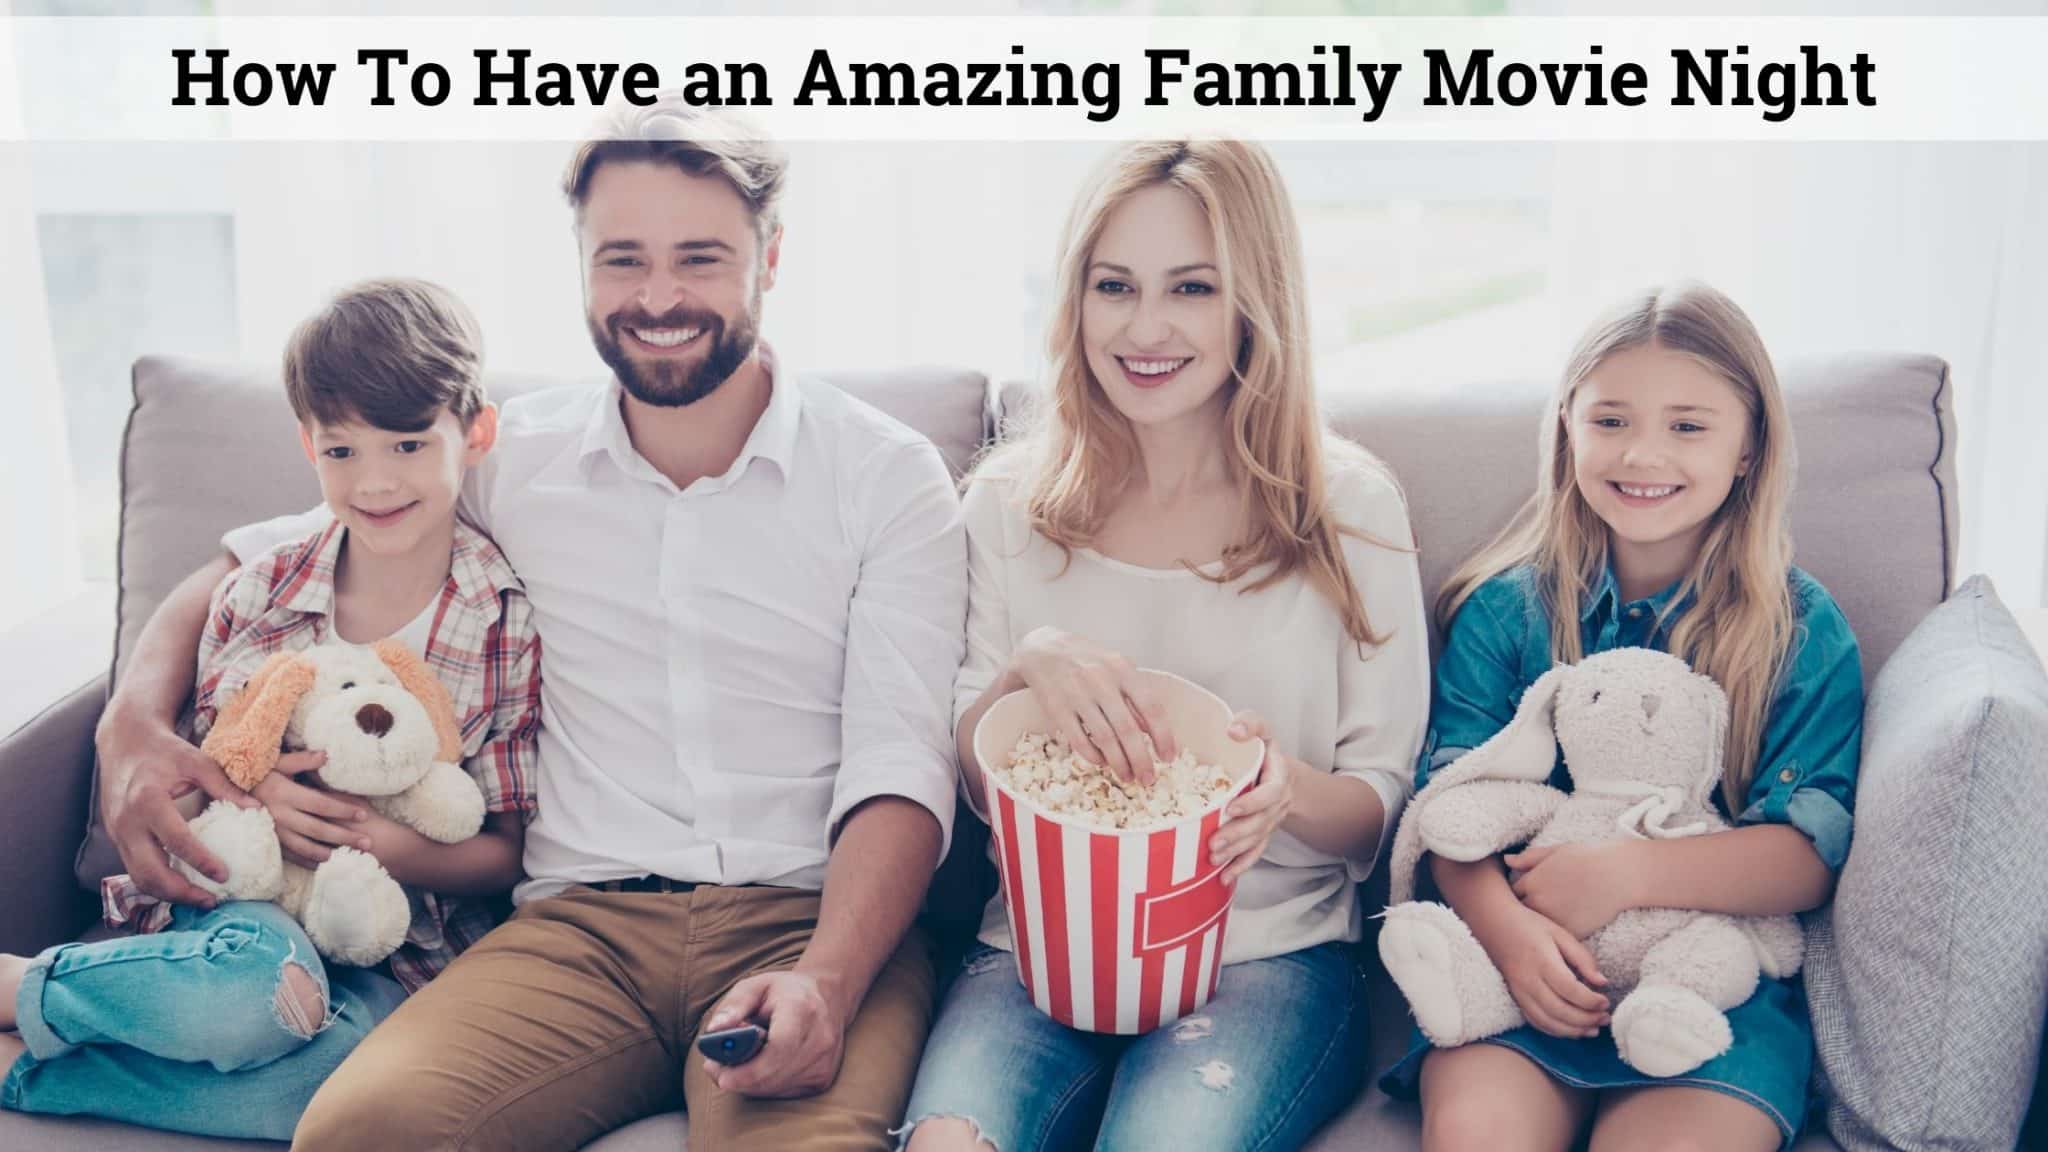 How To Have an Amazing Family Movie Night